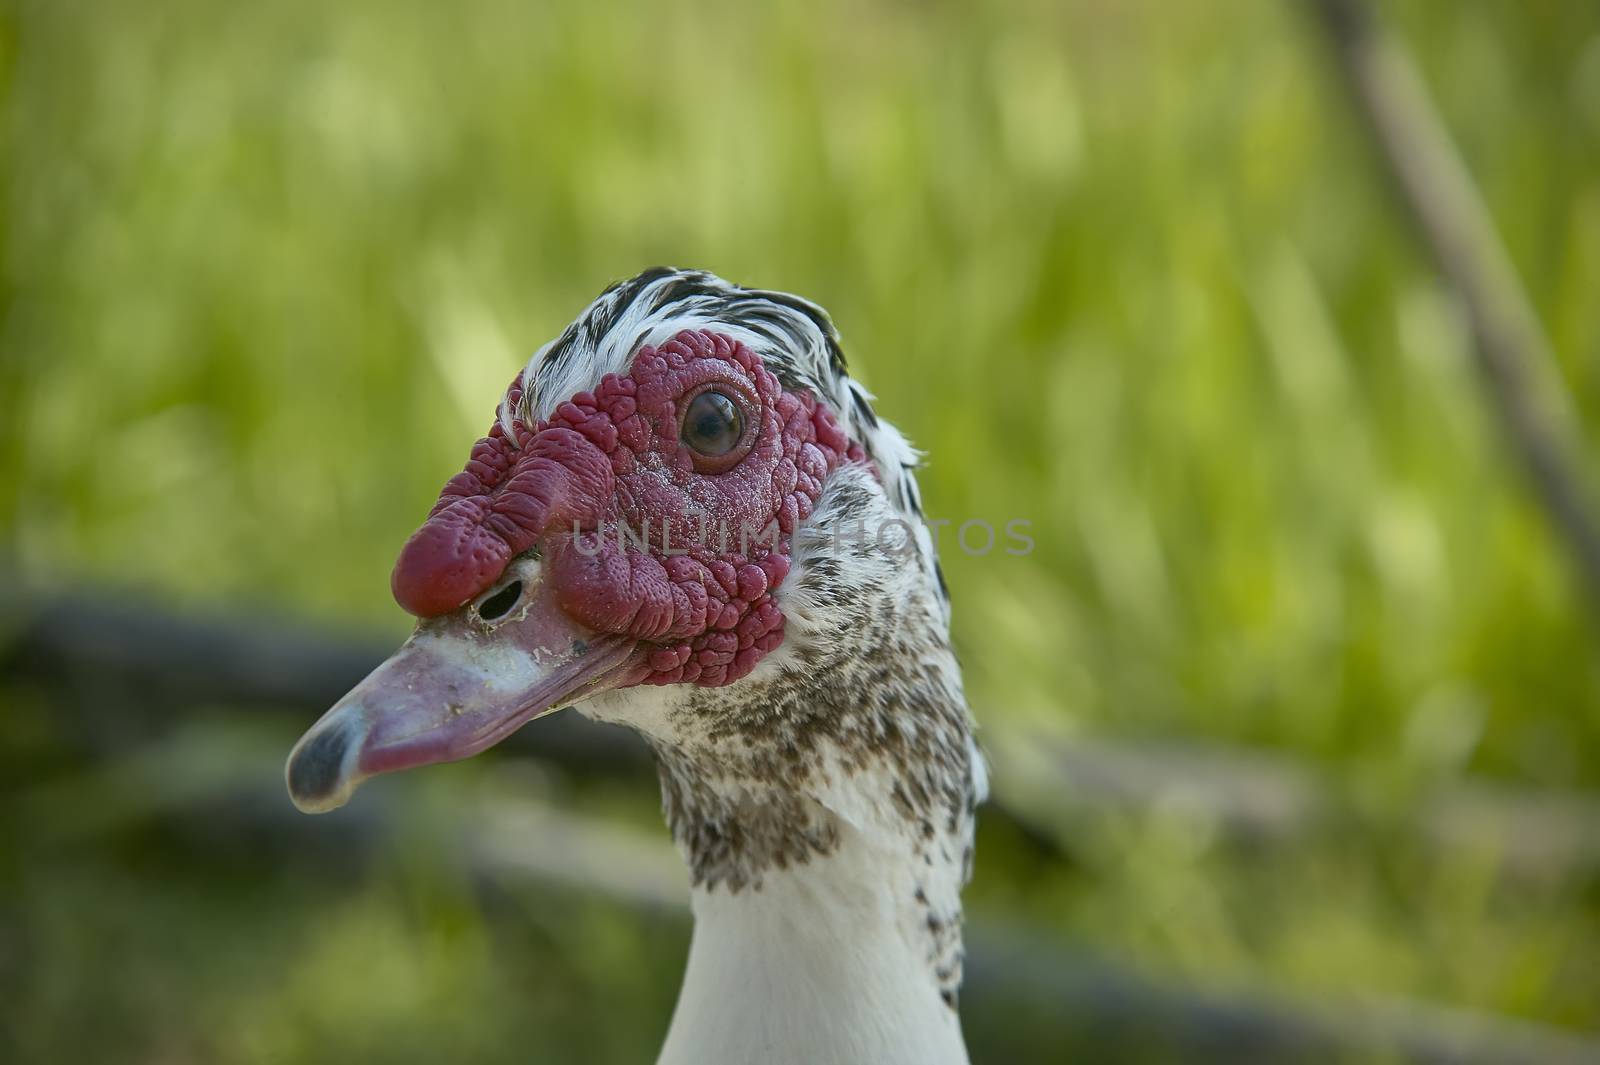 Close-up of the head of a turkey in which the beak is well visible in the eye and in general all the head.